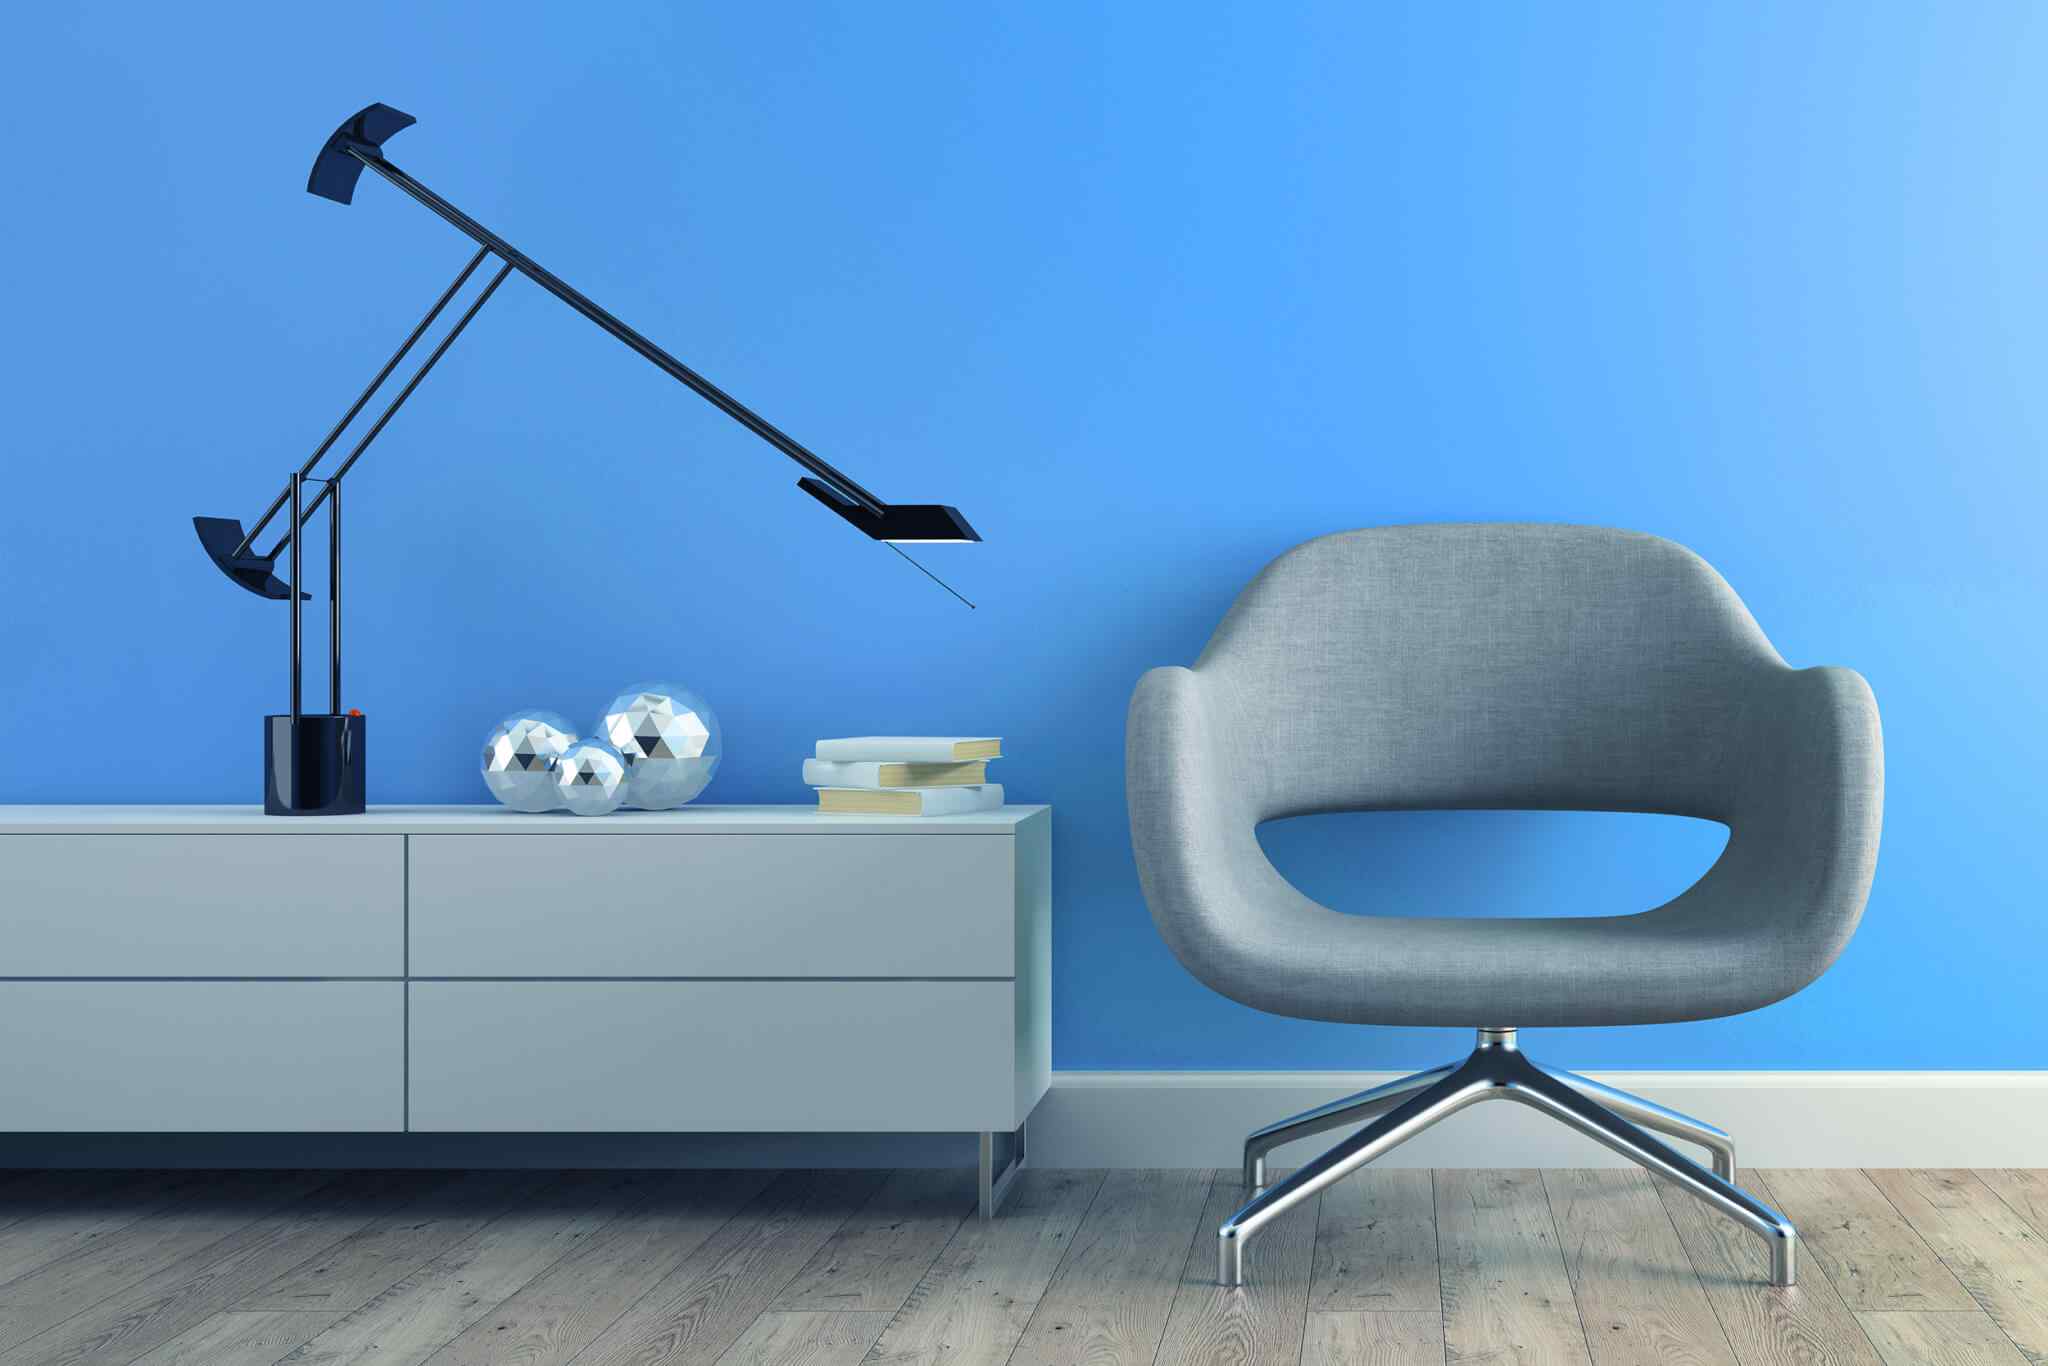 https://blueskypatiocovers.com/wp-content/uploads/2017/05/image-chair-blue-wall.jpg